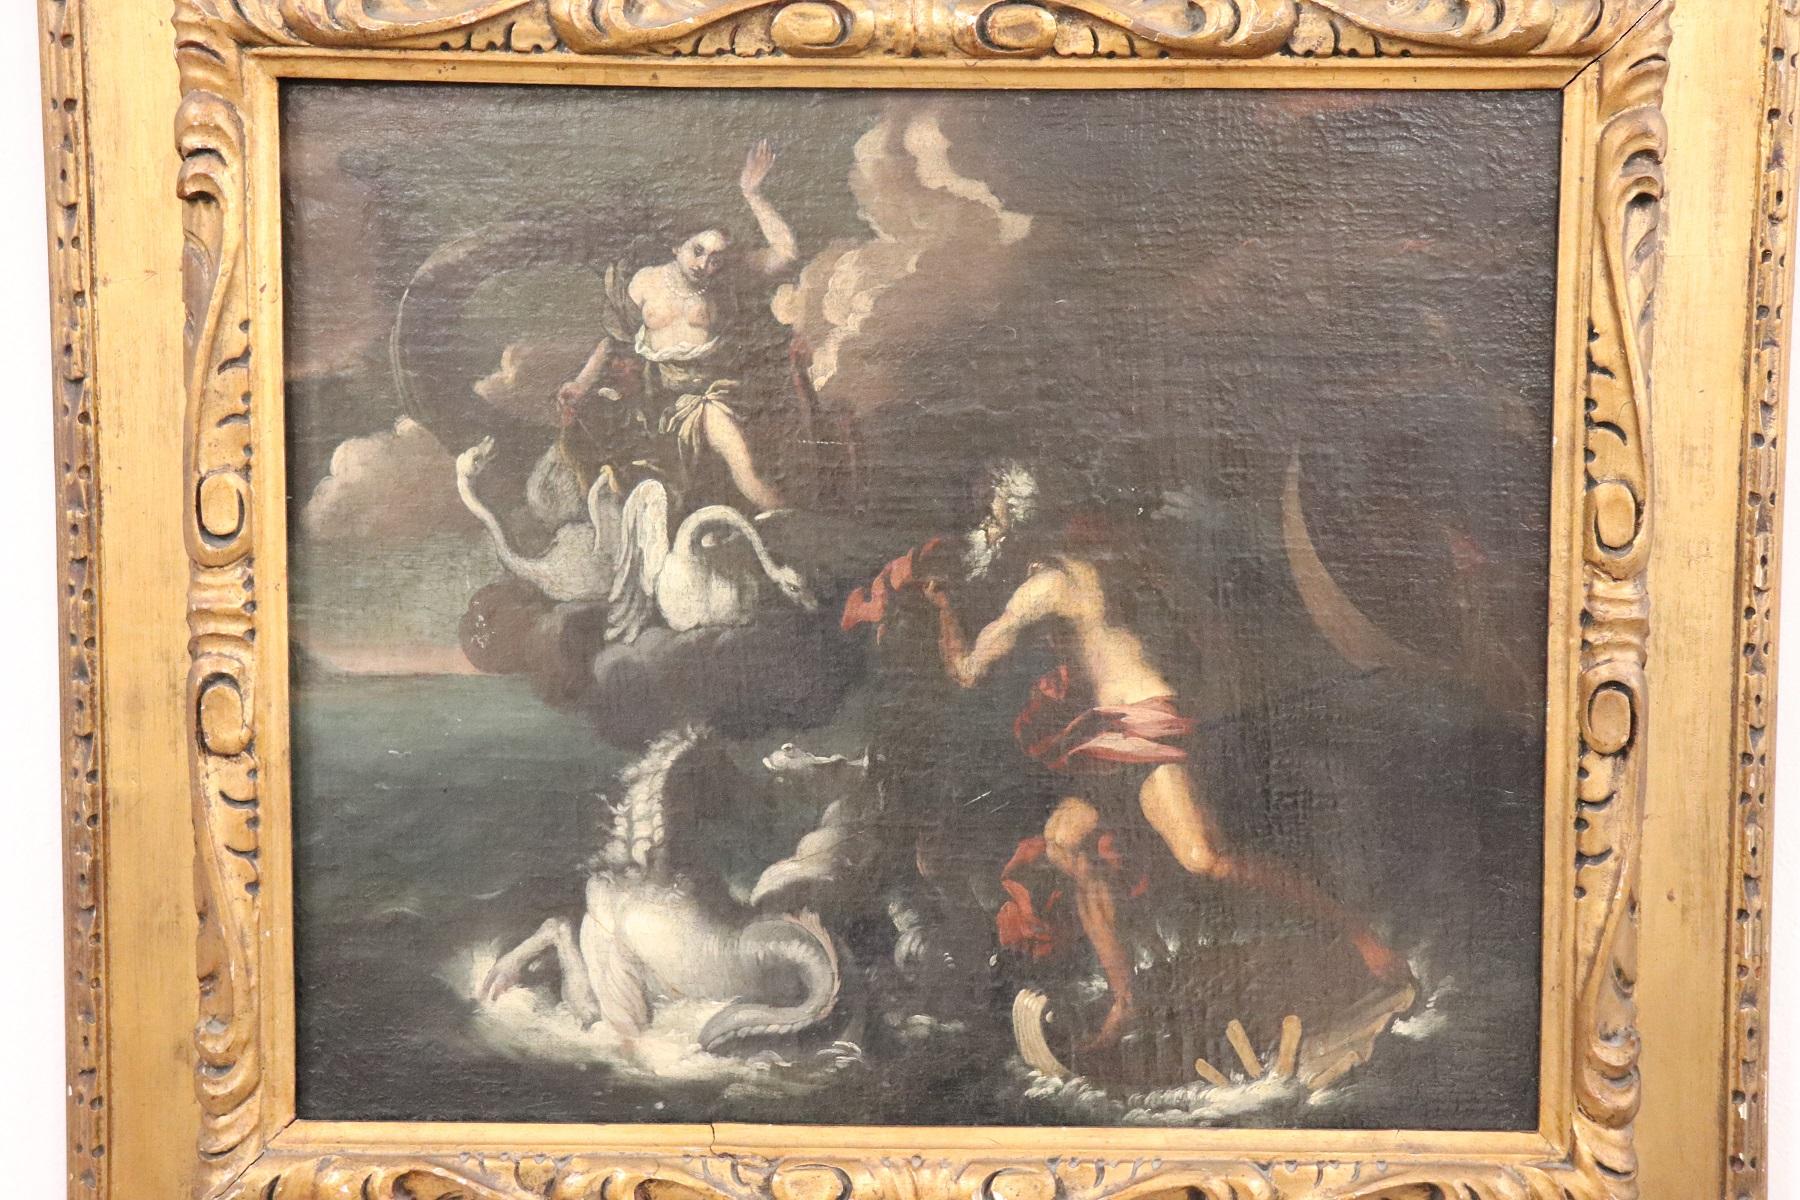 Important ancient oil painting on canvas of Bolognese school second half 17th century. The scene is very complex and animated. The subject is mythological Juno announces the arrival of the ships of Enea to Neptune. The stories of Aeneas were very